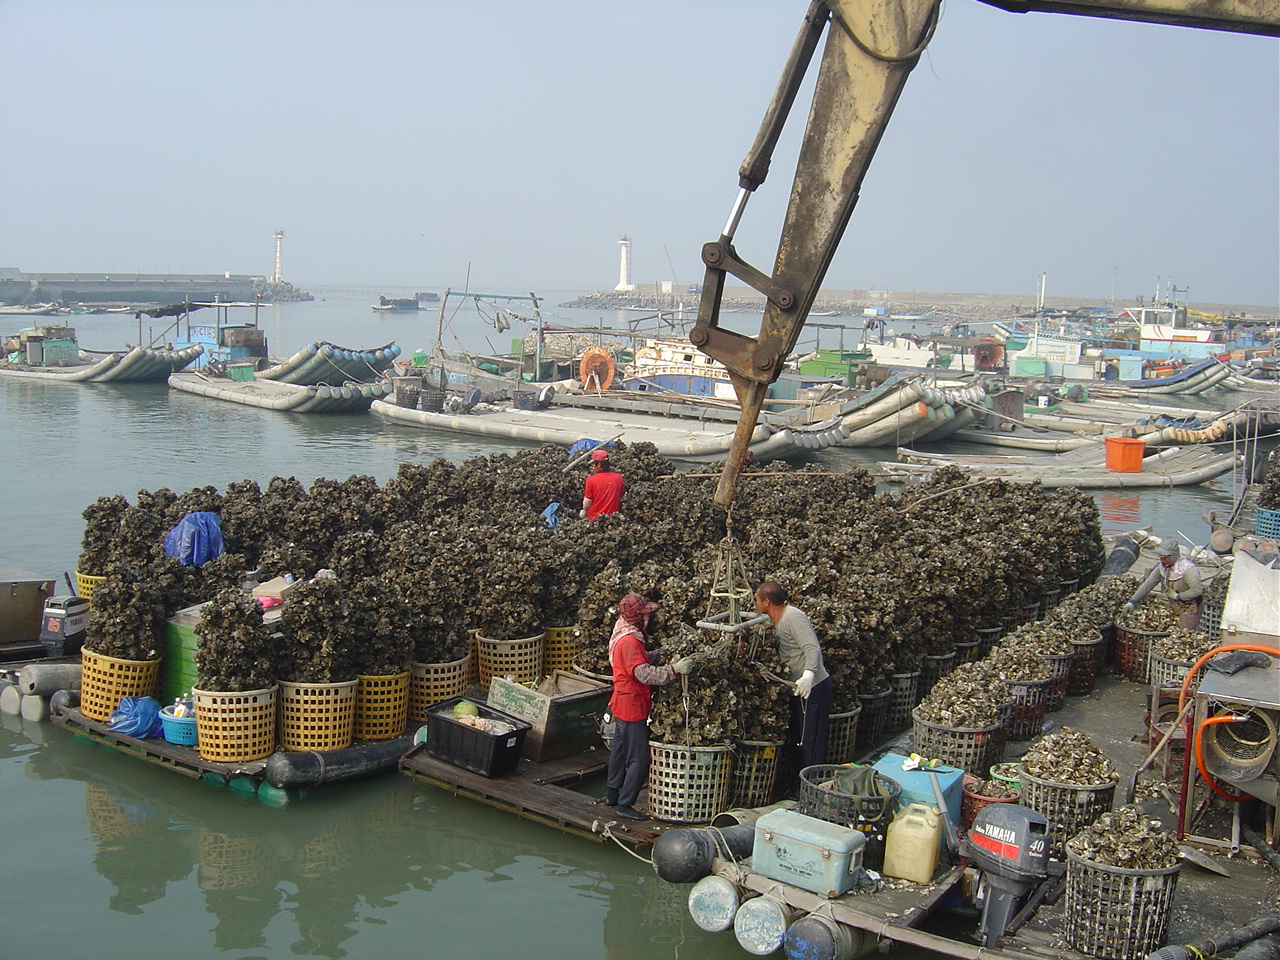 Taixi Fishing Harbor is a commercial oyster harbor